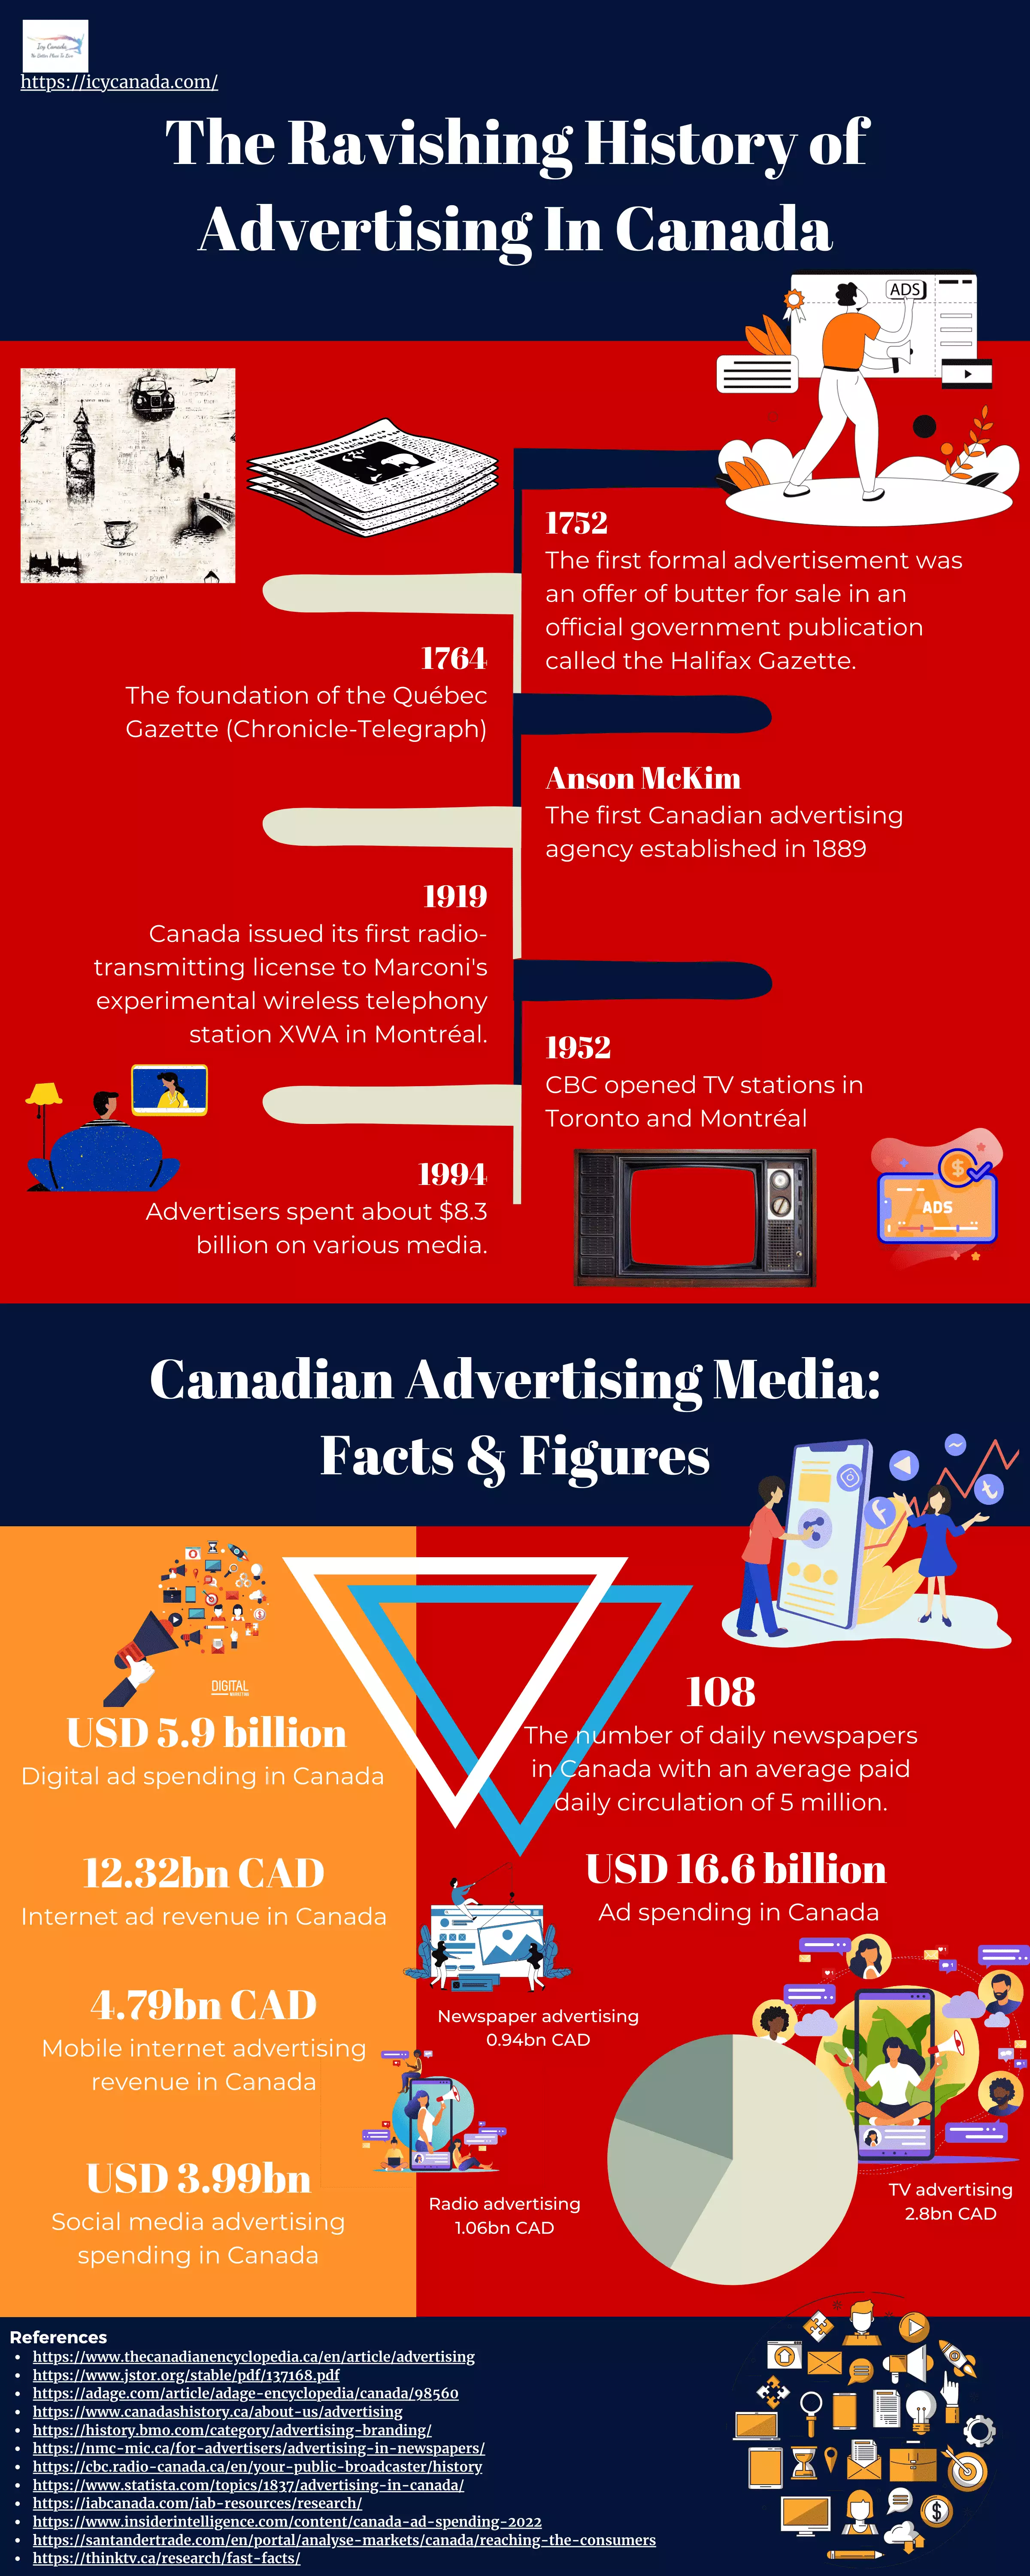 Infographic That Explains The Ravishing History of Advertising In Canada